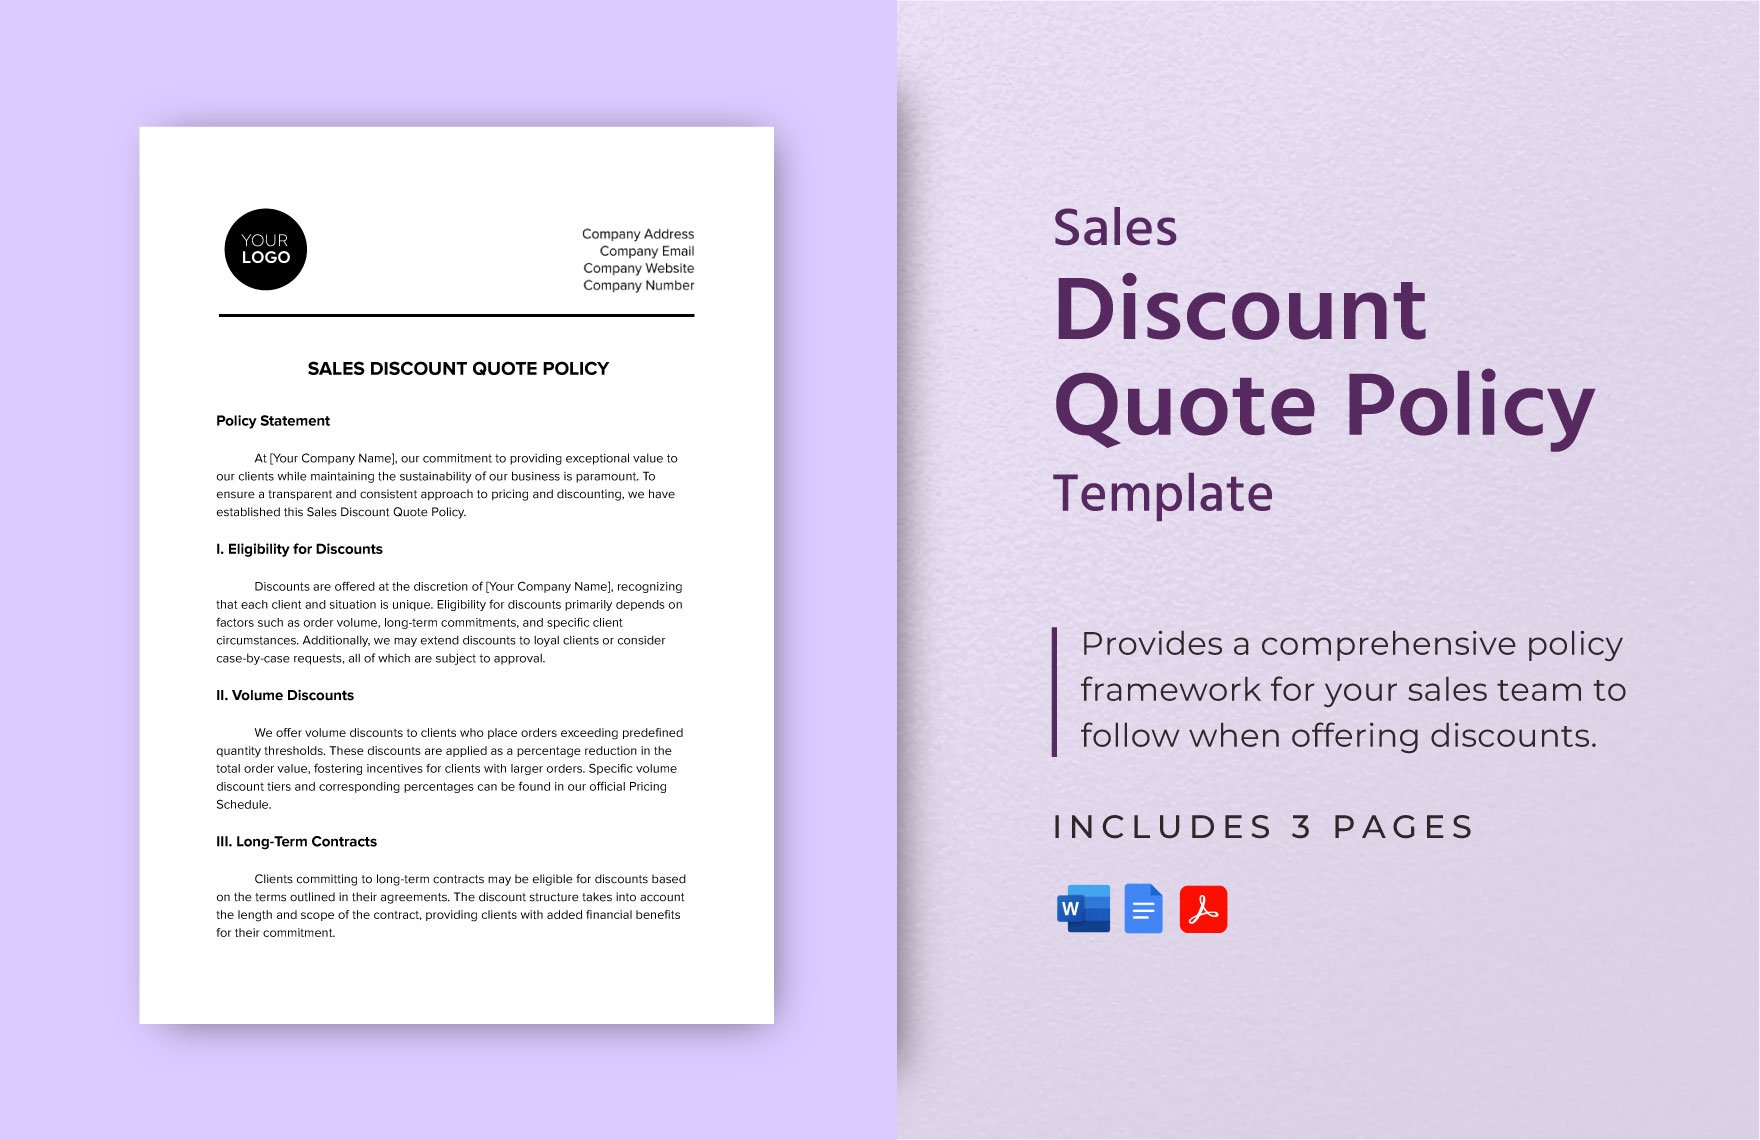 Sales Discount Quote Policy Template in Word, Google Docs, PDF